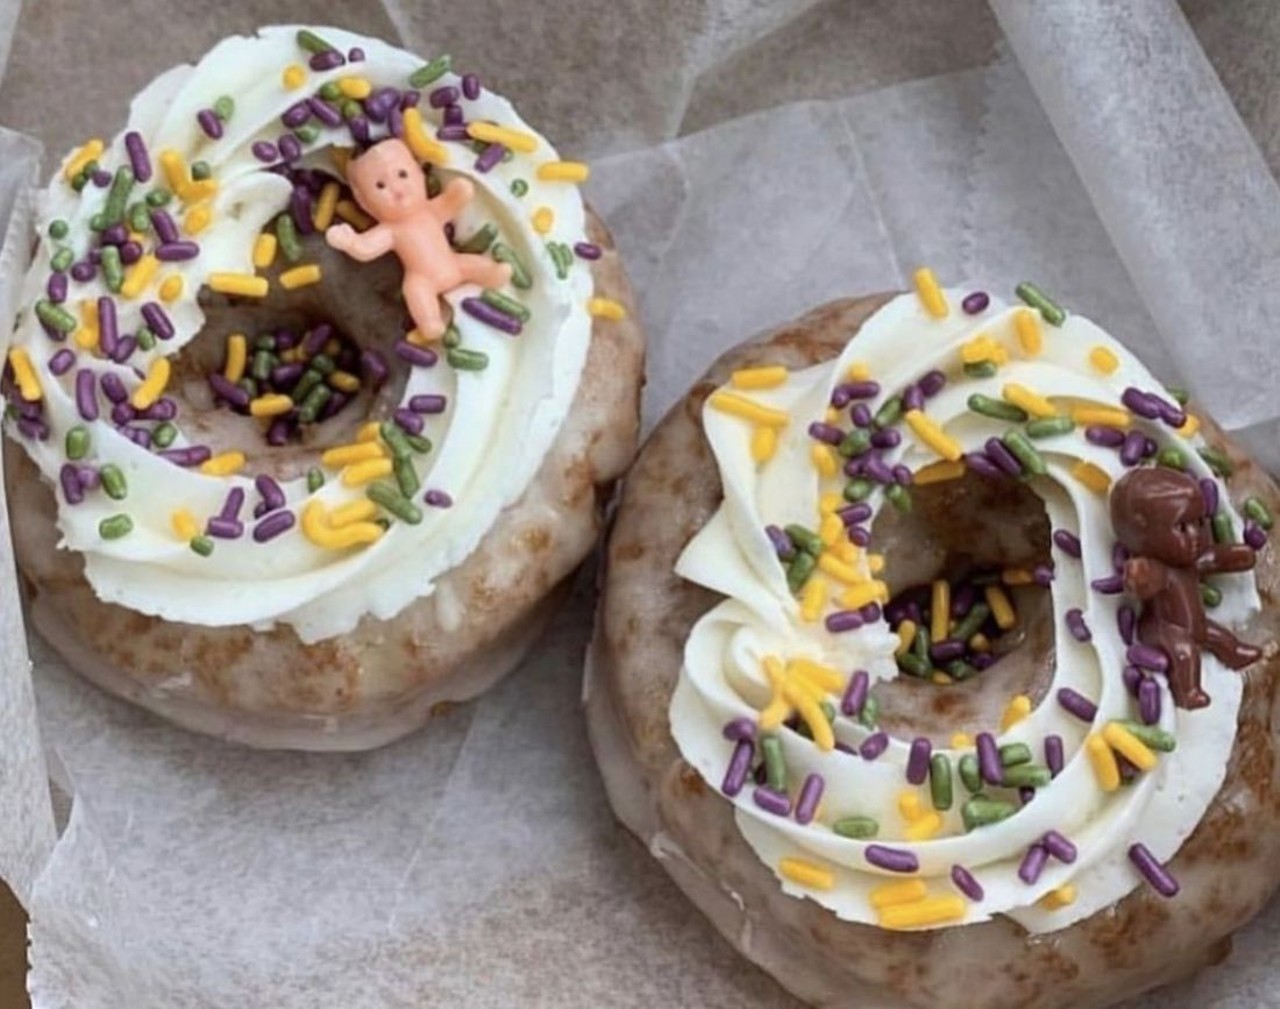  The Vegan Doughnut Company
14811 Detroit Ave., Lakewood
In Lakewood, The Vegan Doughnut Company will be participating in Fat Tuesday with, naturally, vegan offerings. They&#146;ll announce their menu Sunday night but it&#146;s sure to be filled with goodies like last year&#146;s popular king cake doughnuts.
Photo via @TheVeganDoughnutCo/Instagram